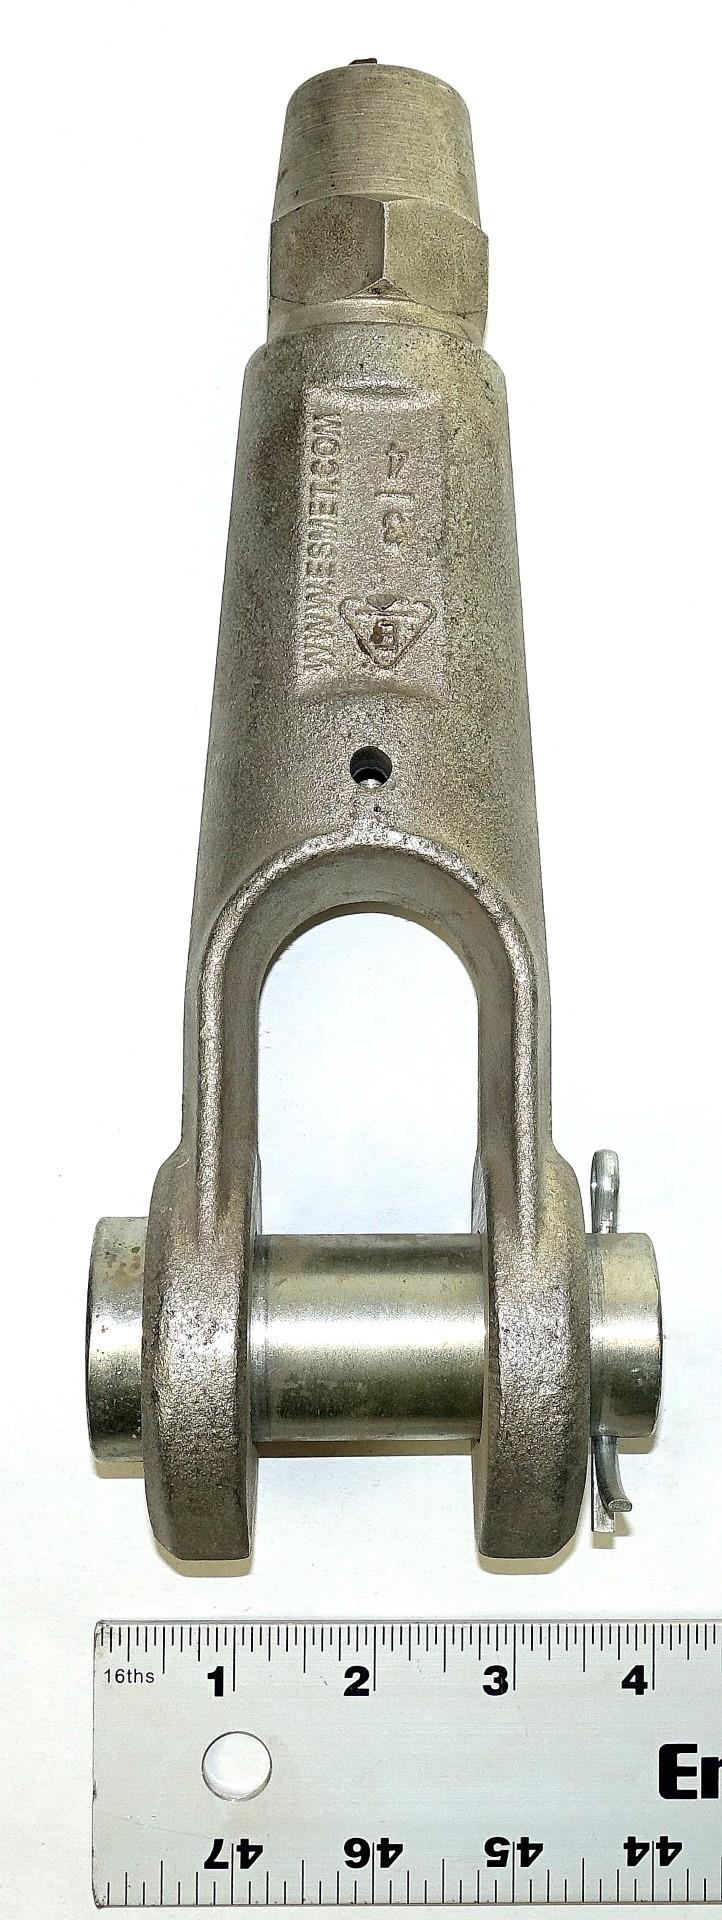 5T-931 | 4030-00-706-5553 Wrecker Rear Winch Cable Clevis (3-4 inch wire) (5) (Large).JPG